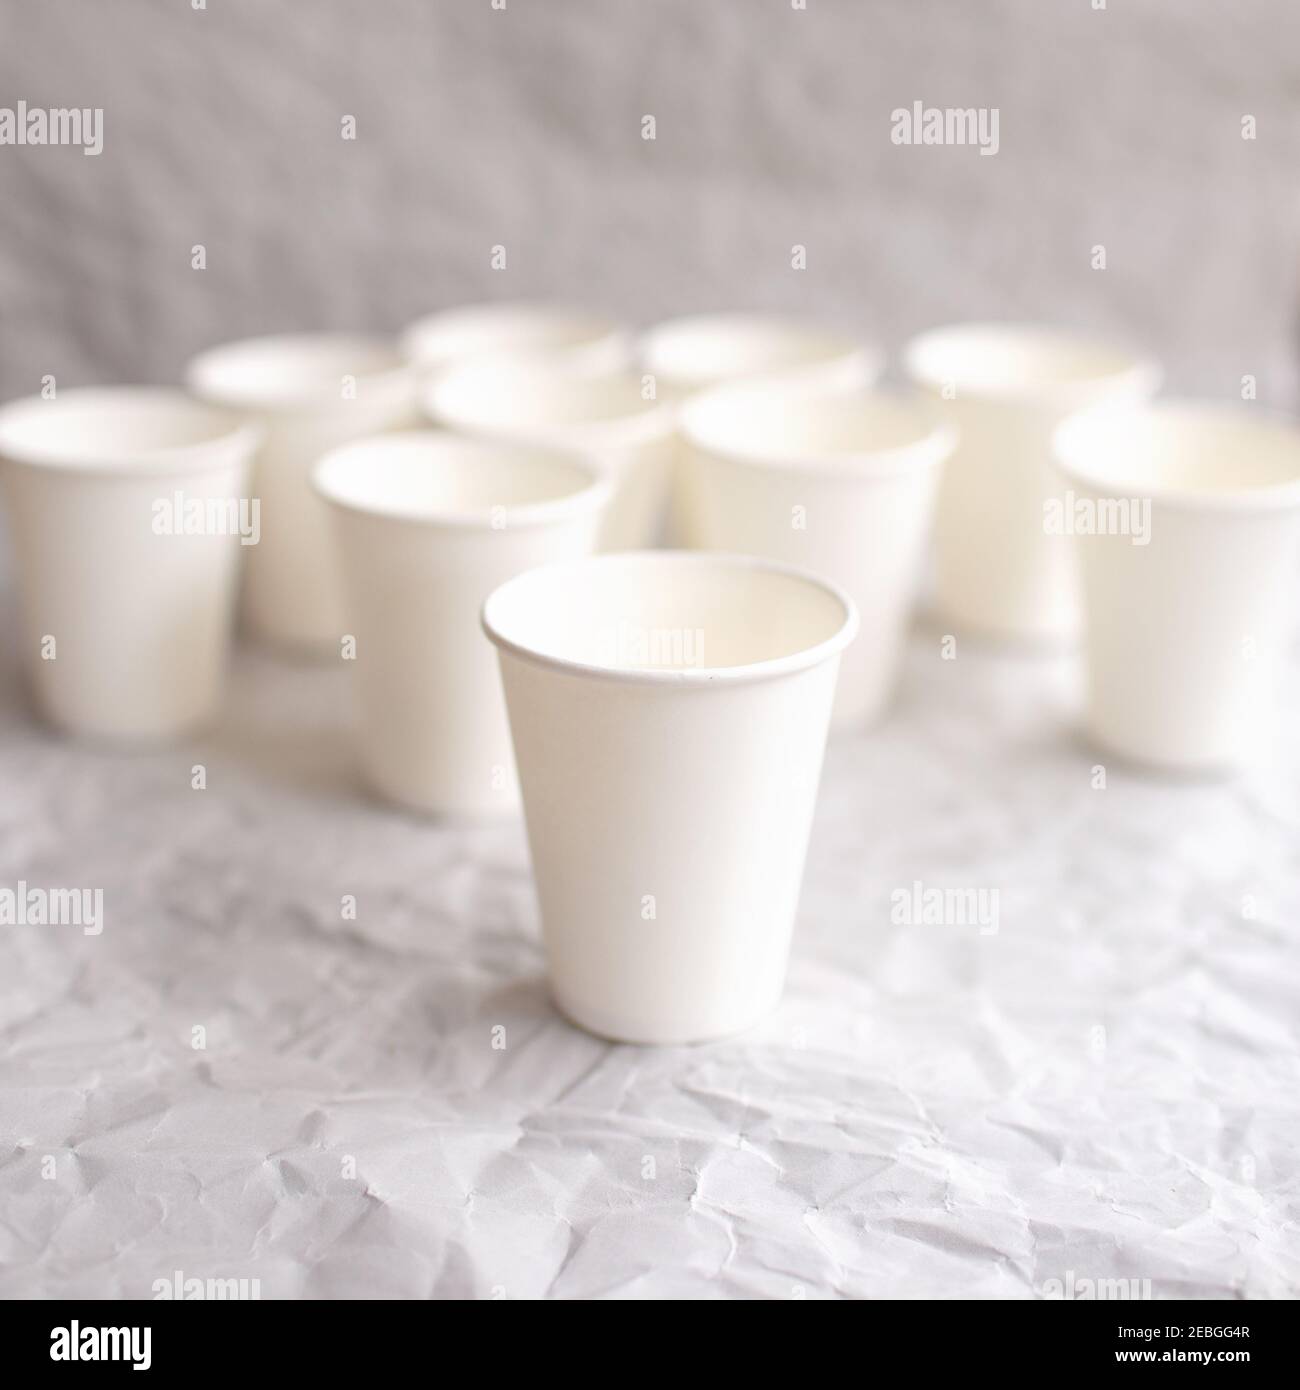 disposable cups made of white paper are laid out on gray crumpled paper in a geometric pattern Stock Photo